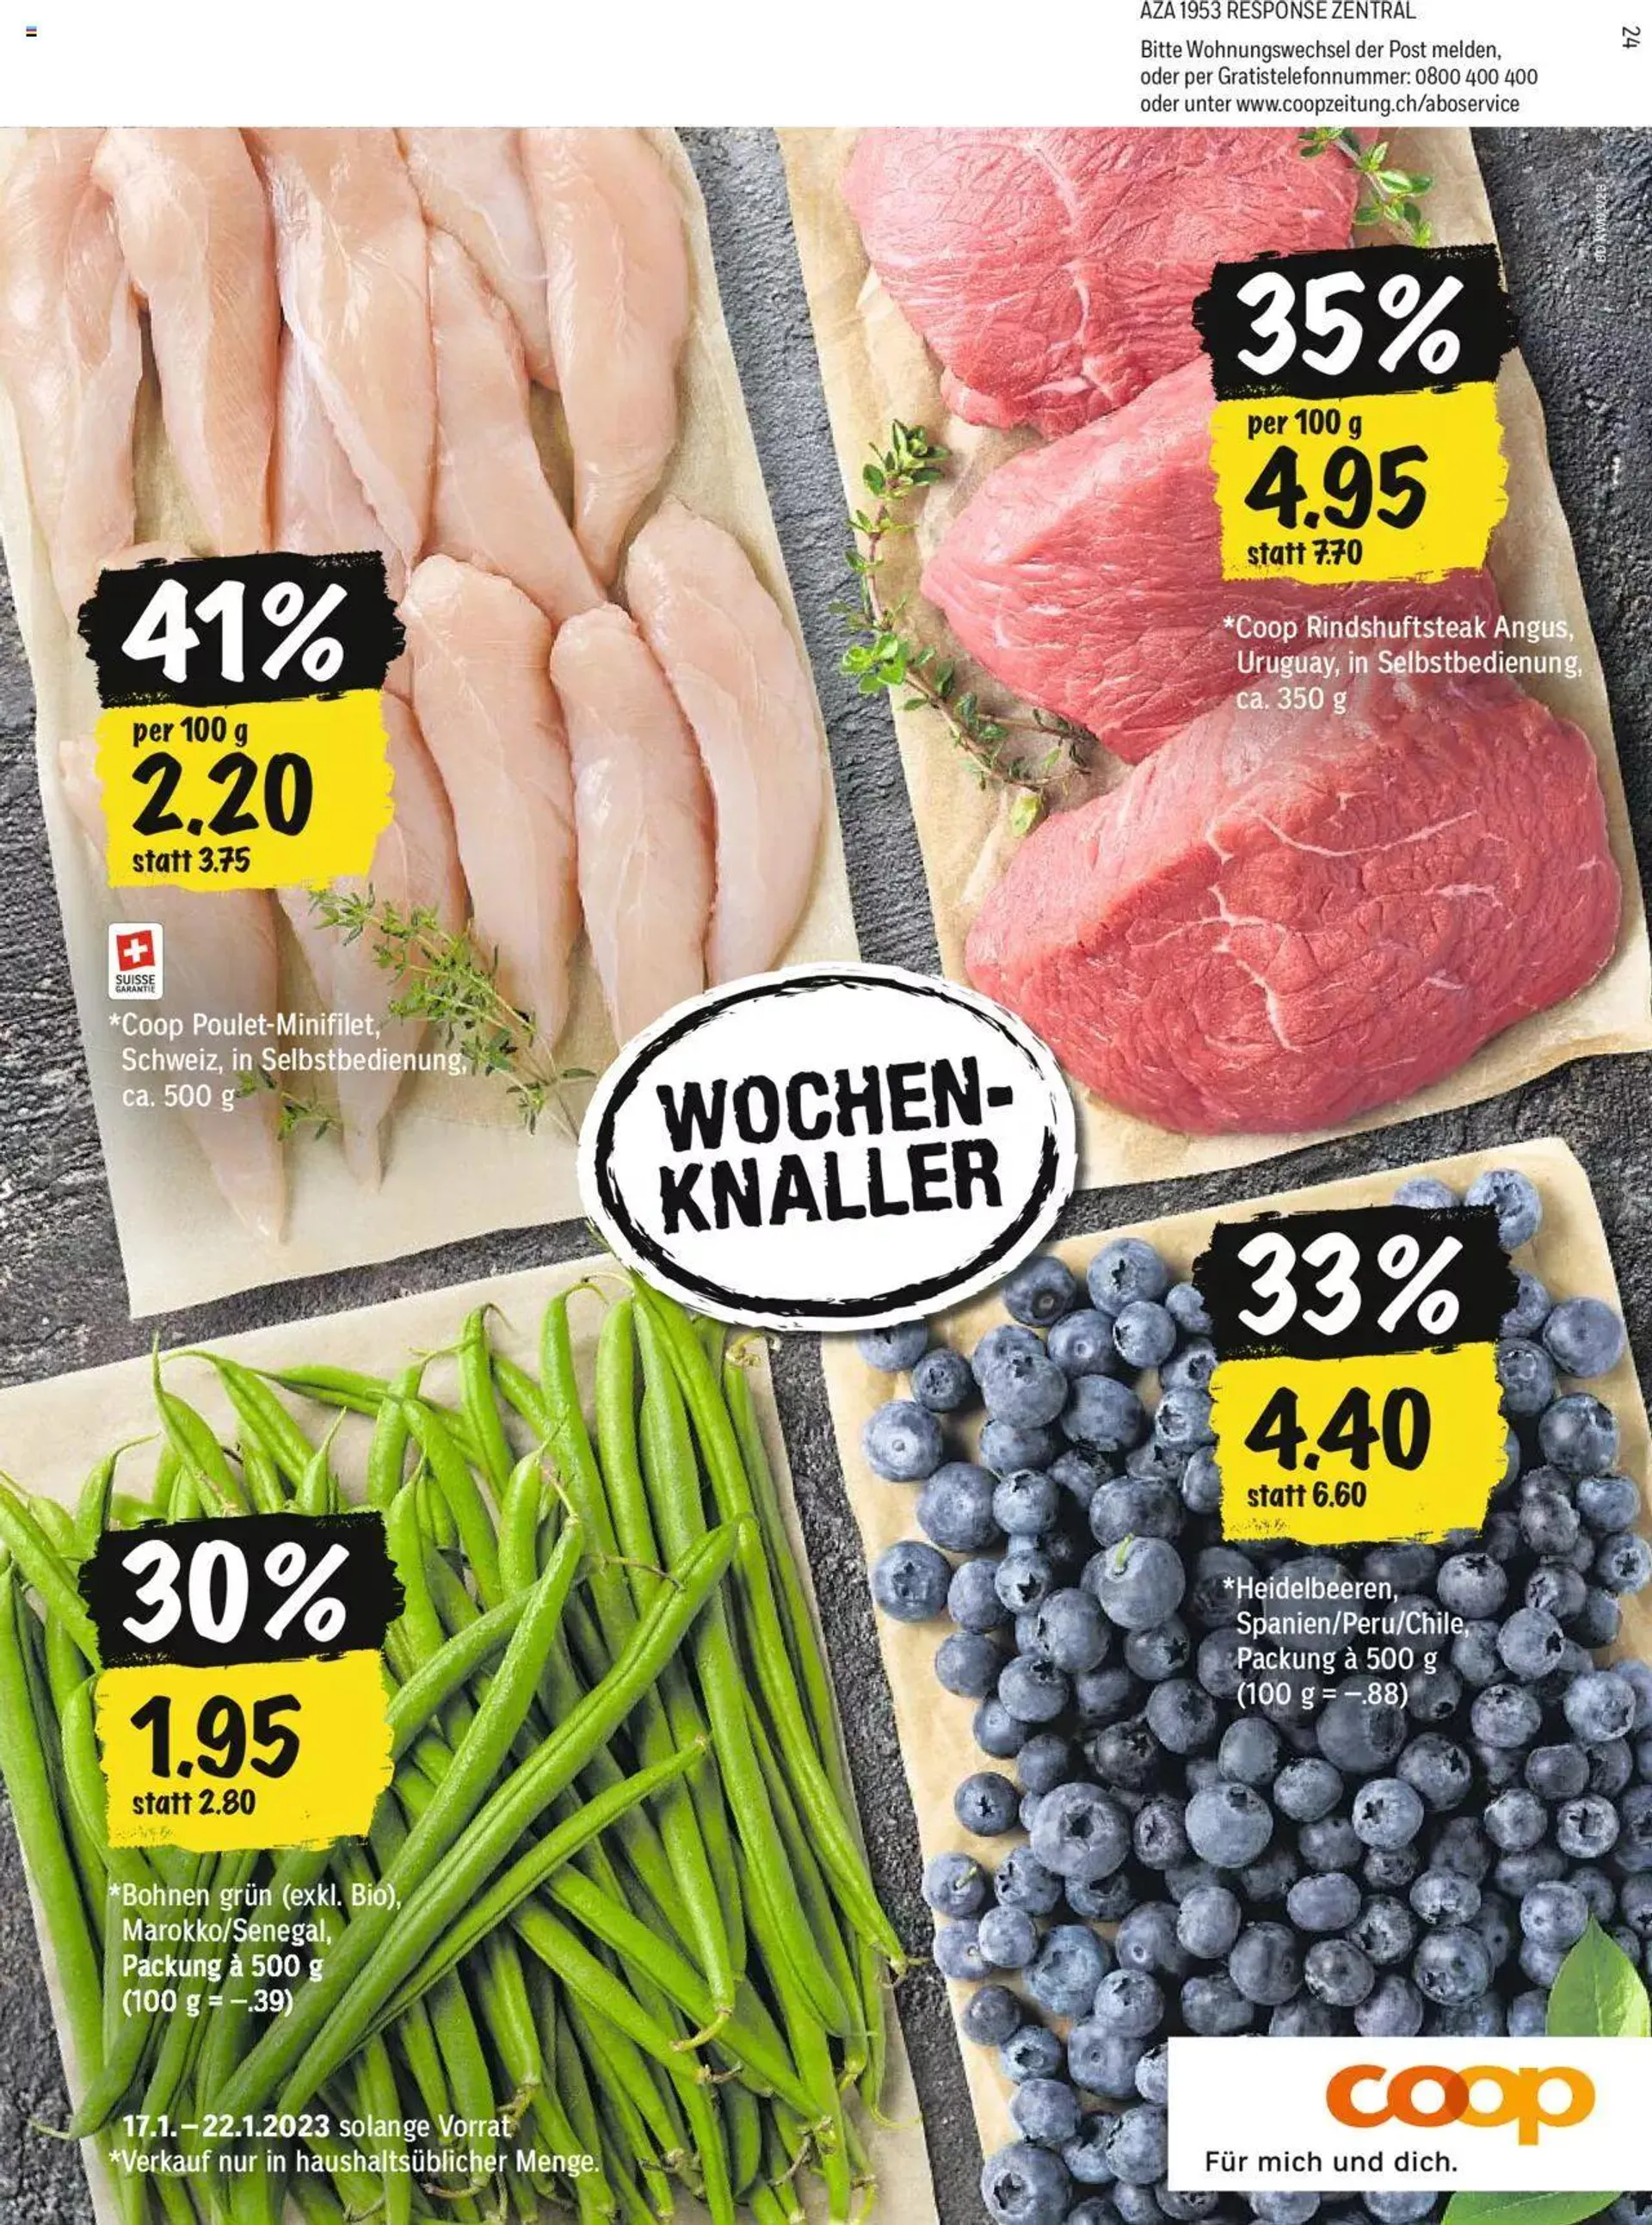 Coop - Aktions Woche - 95